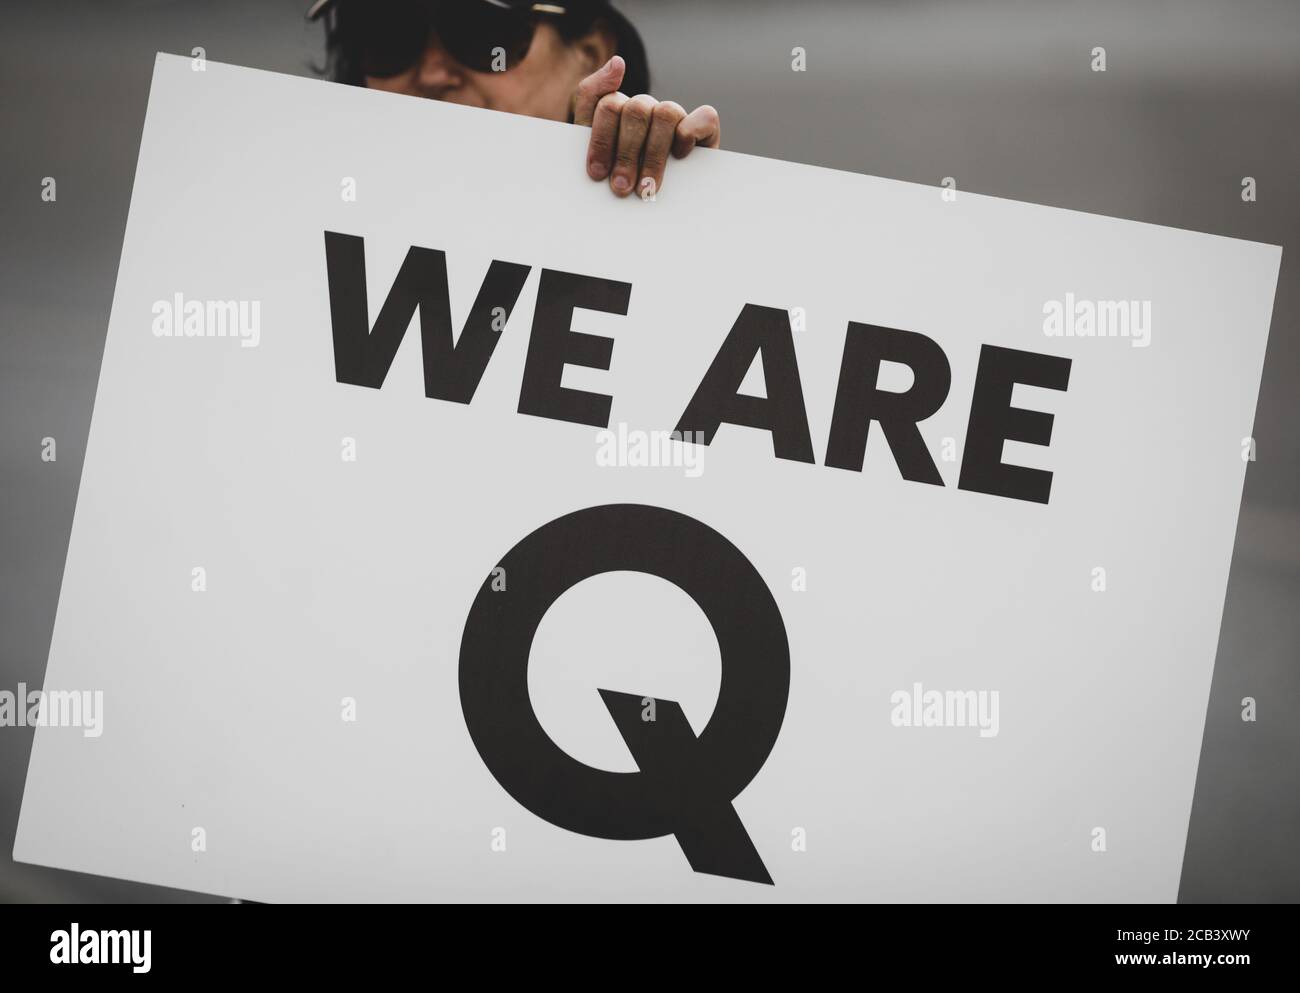 Bucharest, Romania - August 10, 2020: A woman takes part at a protest and displays a Qanon message on a cardboard. Stock Photo